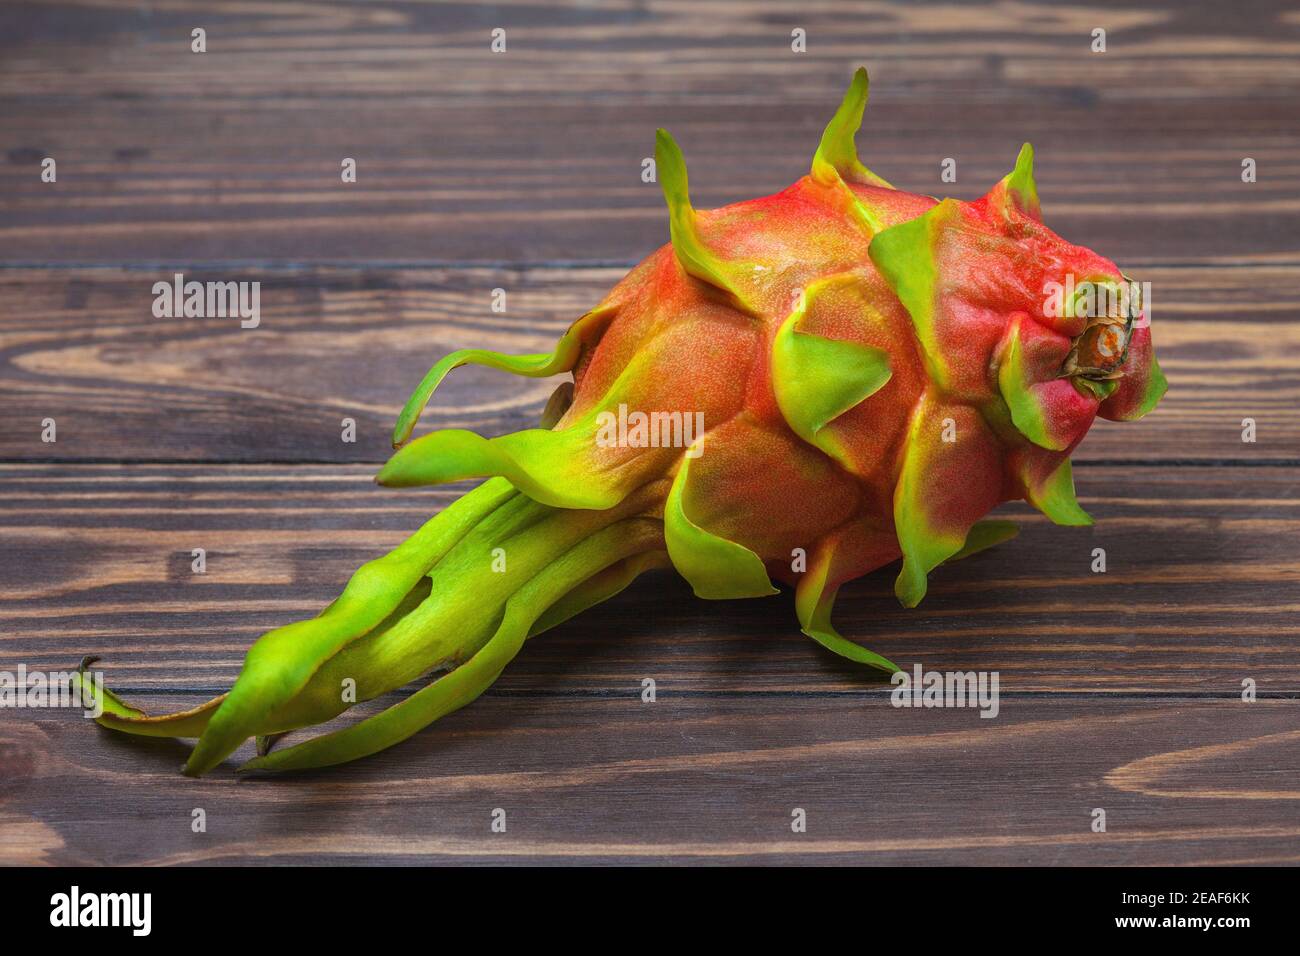 Red pitahaya. Ripe pitahaya fruit lies on a background of wooden boards. High quality photo Stock Photo